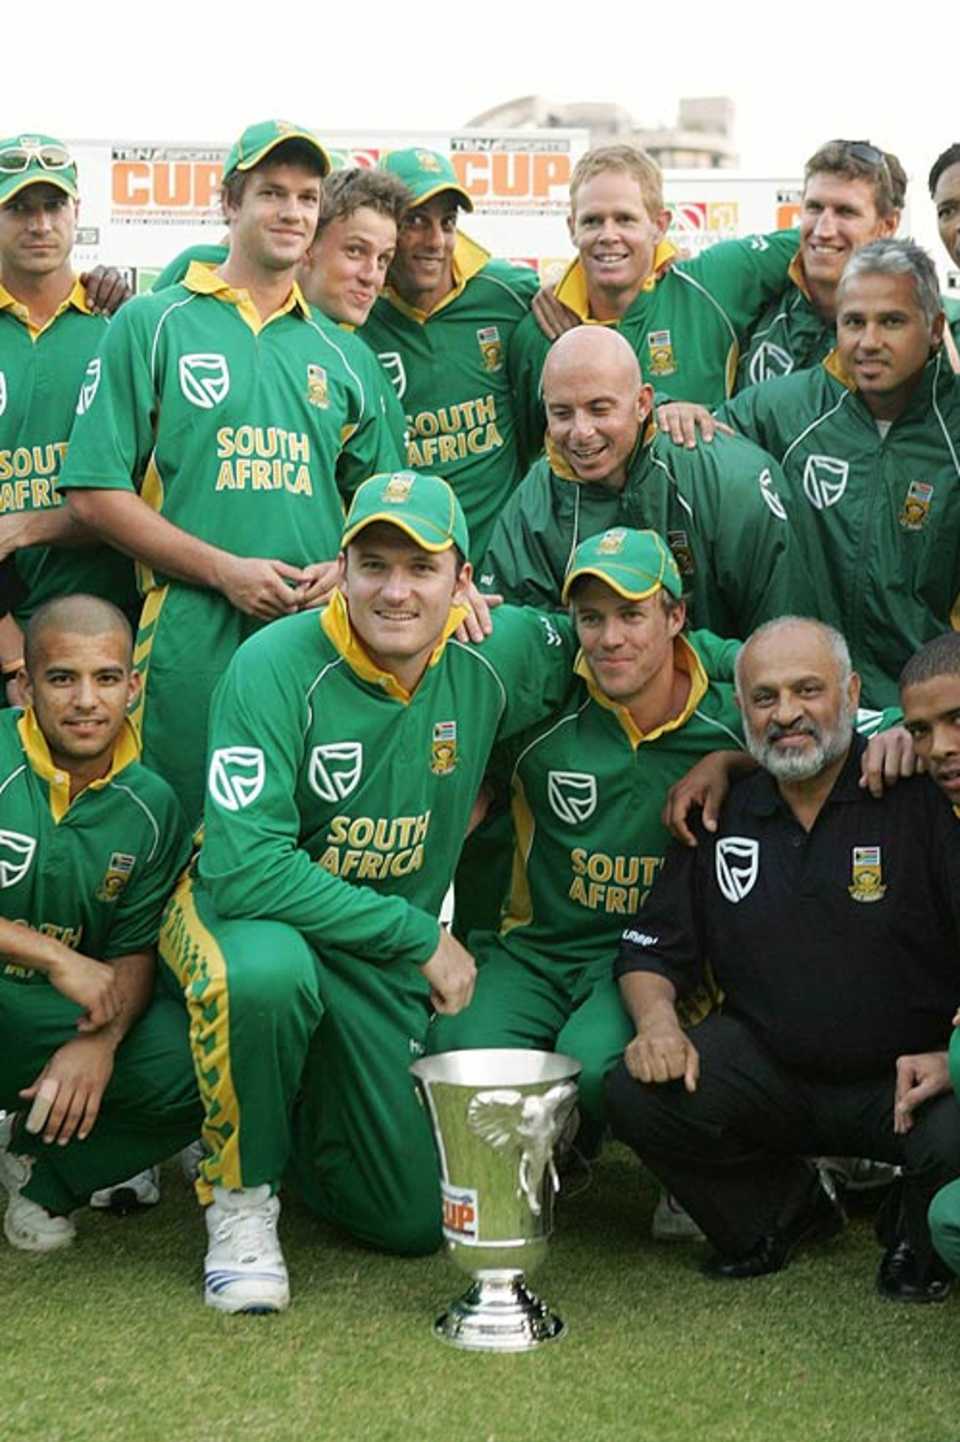 South Africa receive the trophy after winning the series 3-0